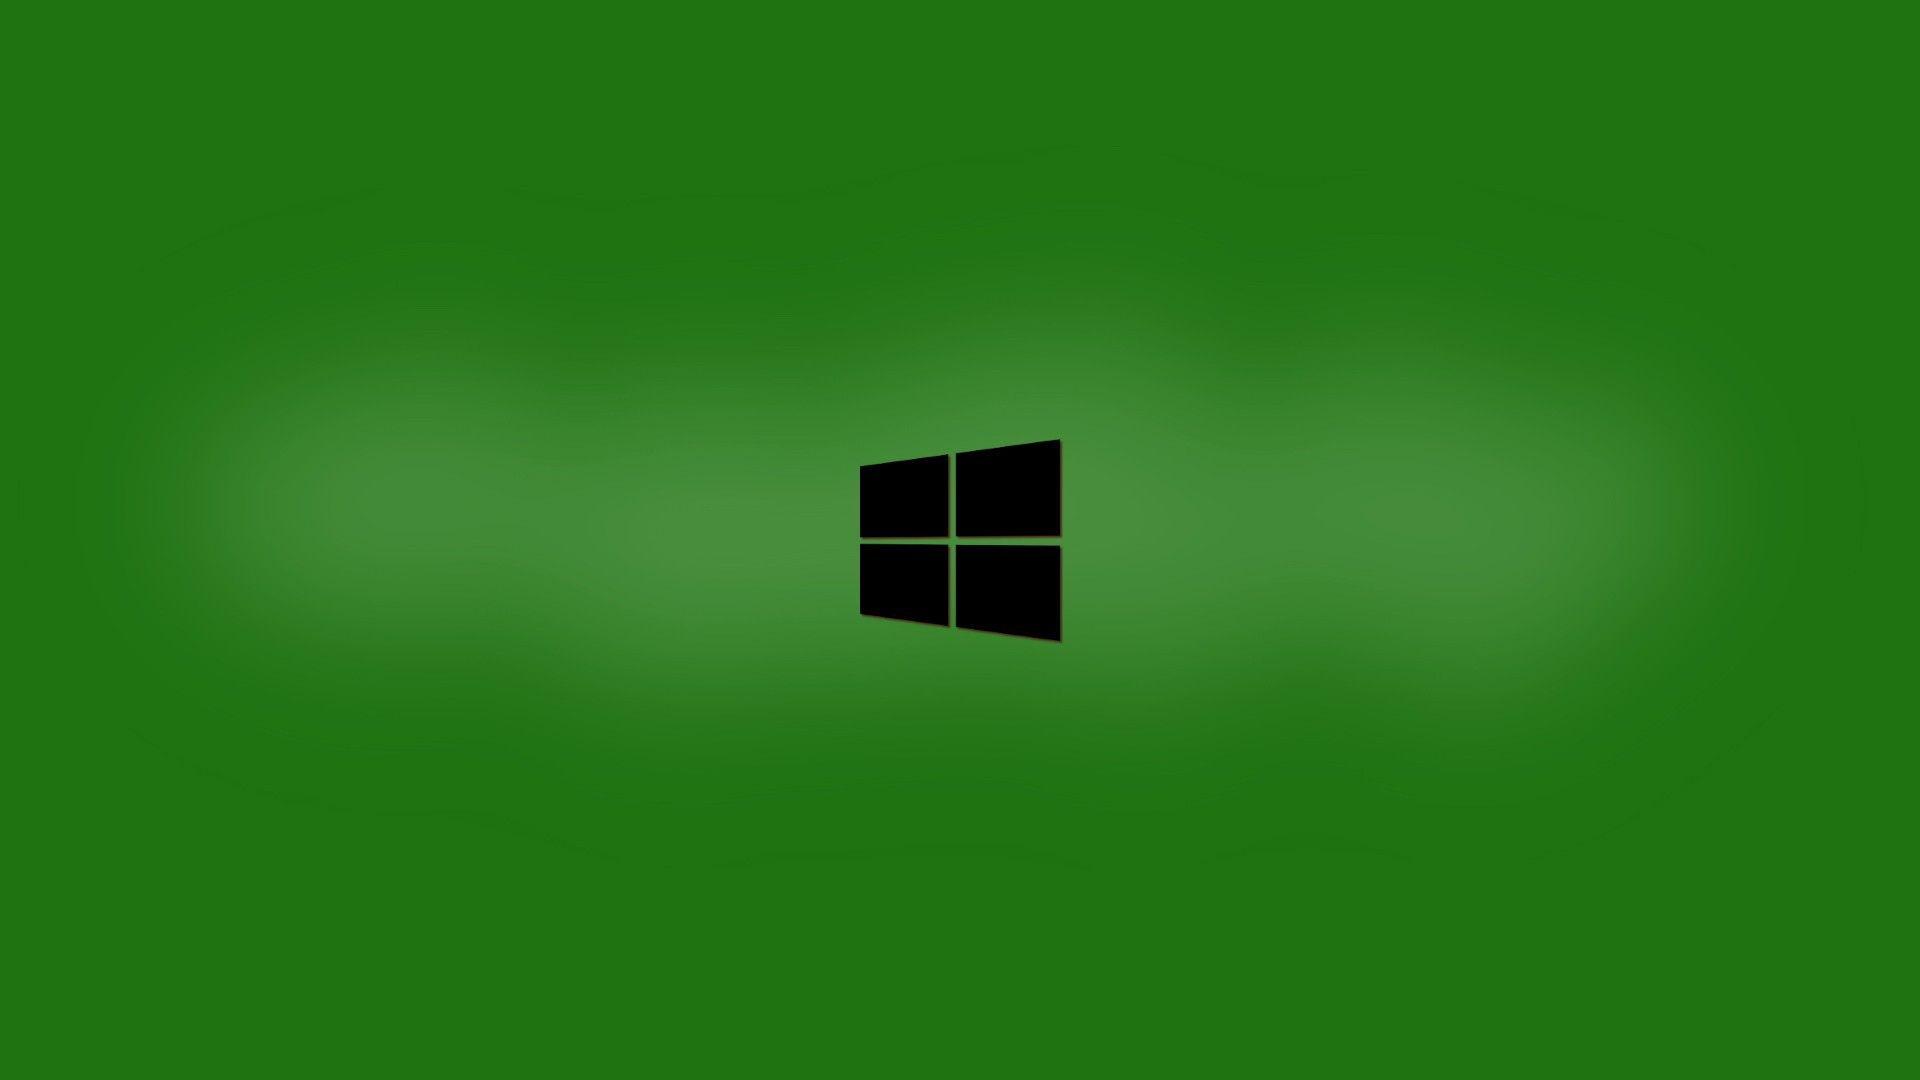 93 Wallpaper For Windows 10 Green Pictures - MyWeb